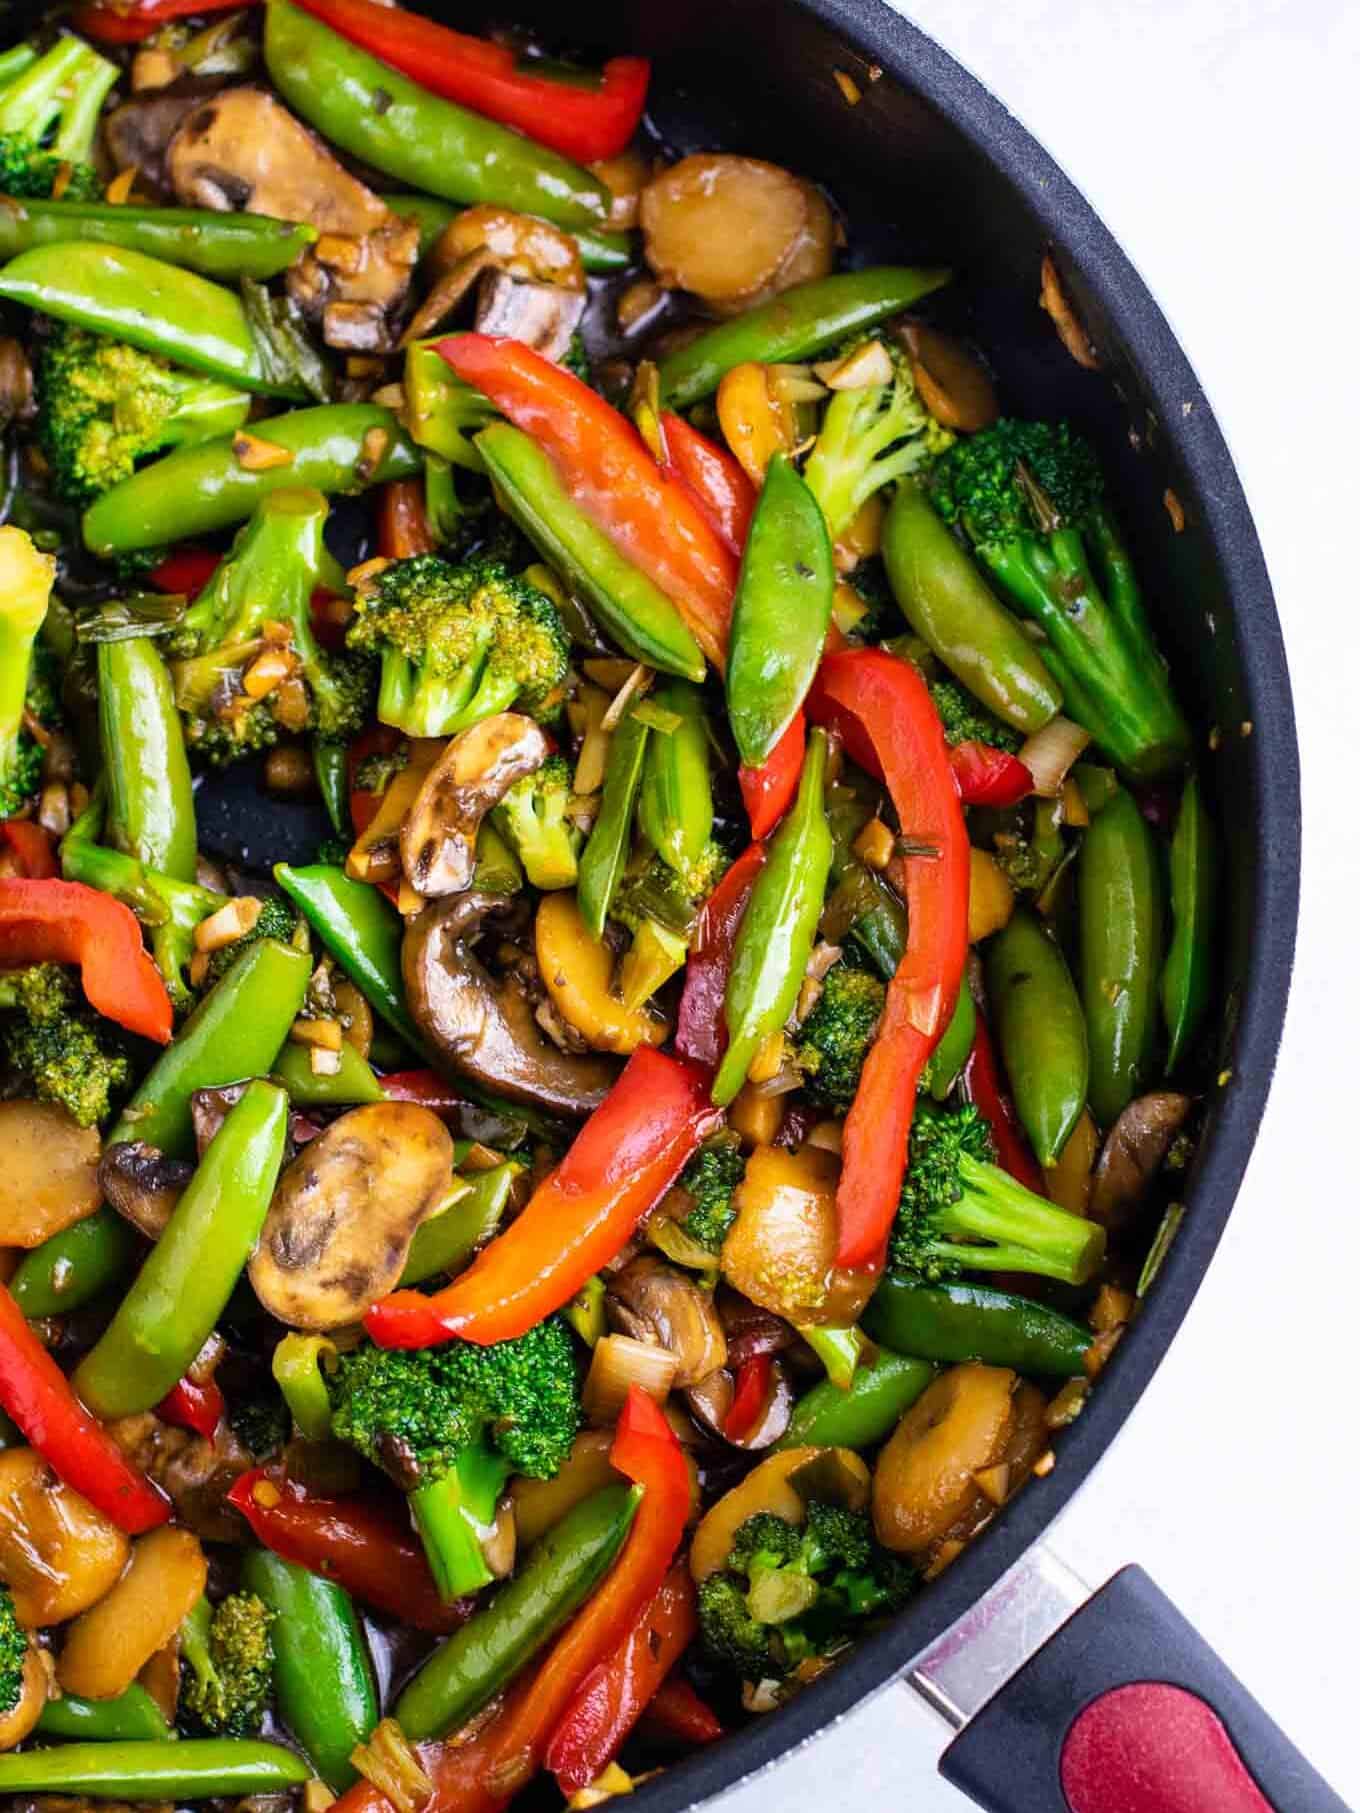 Stir fry vegetables recipe – with homemade stir fry sauce. This is amazing and has so much flavor! #stirfryvegetables #stirfry #stirfryrecipe #stirfrysauce #vegetarian #vegan #glutenfree #dinner #dinnerrecipe